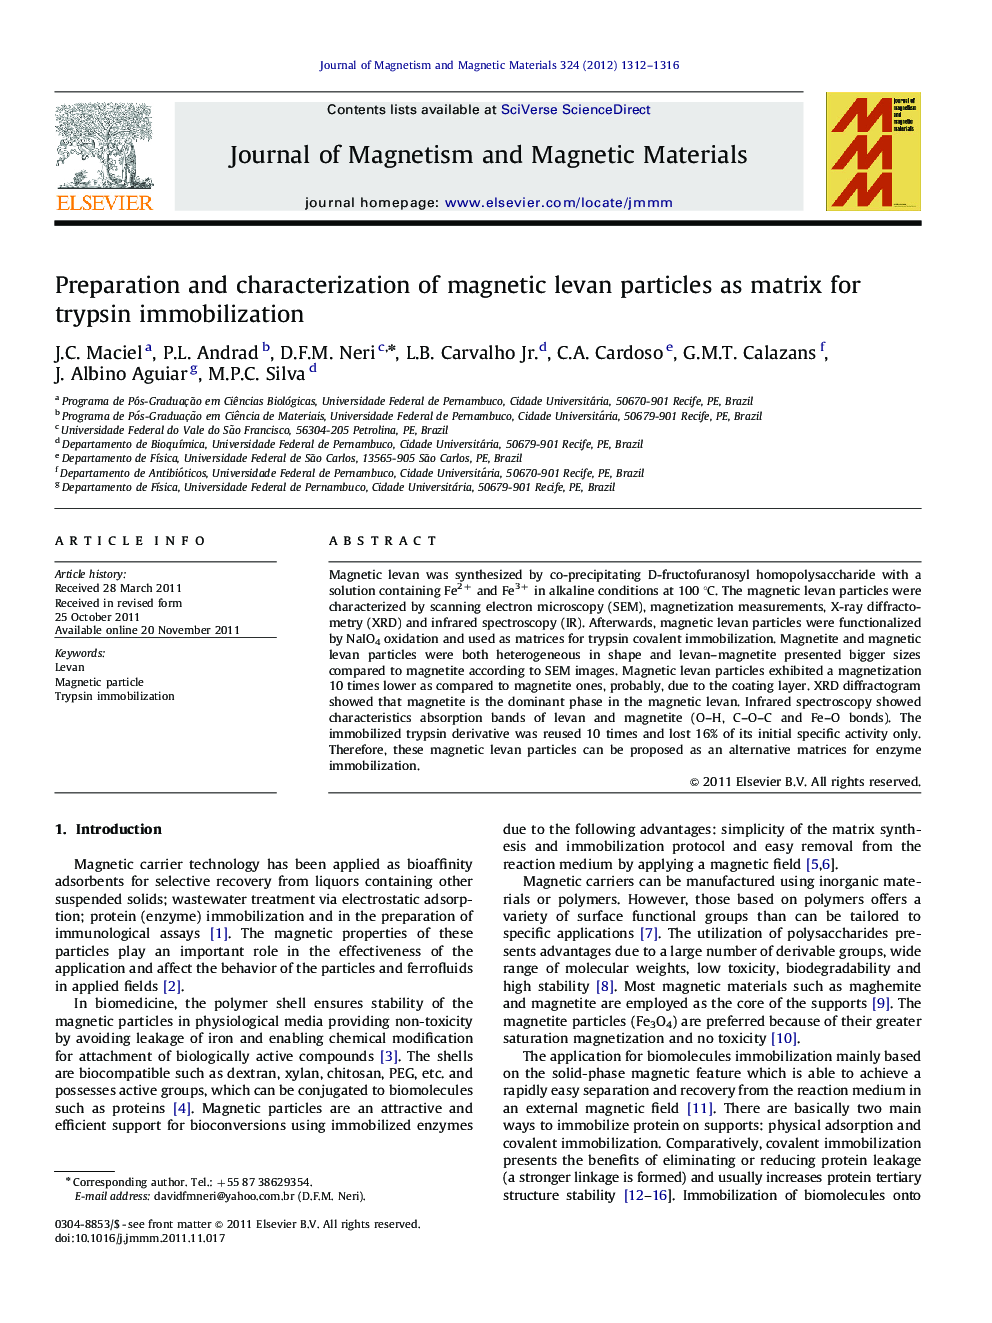 Preparation and characterization of magnetic levan particles as matrix for trypsin immobilization